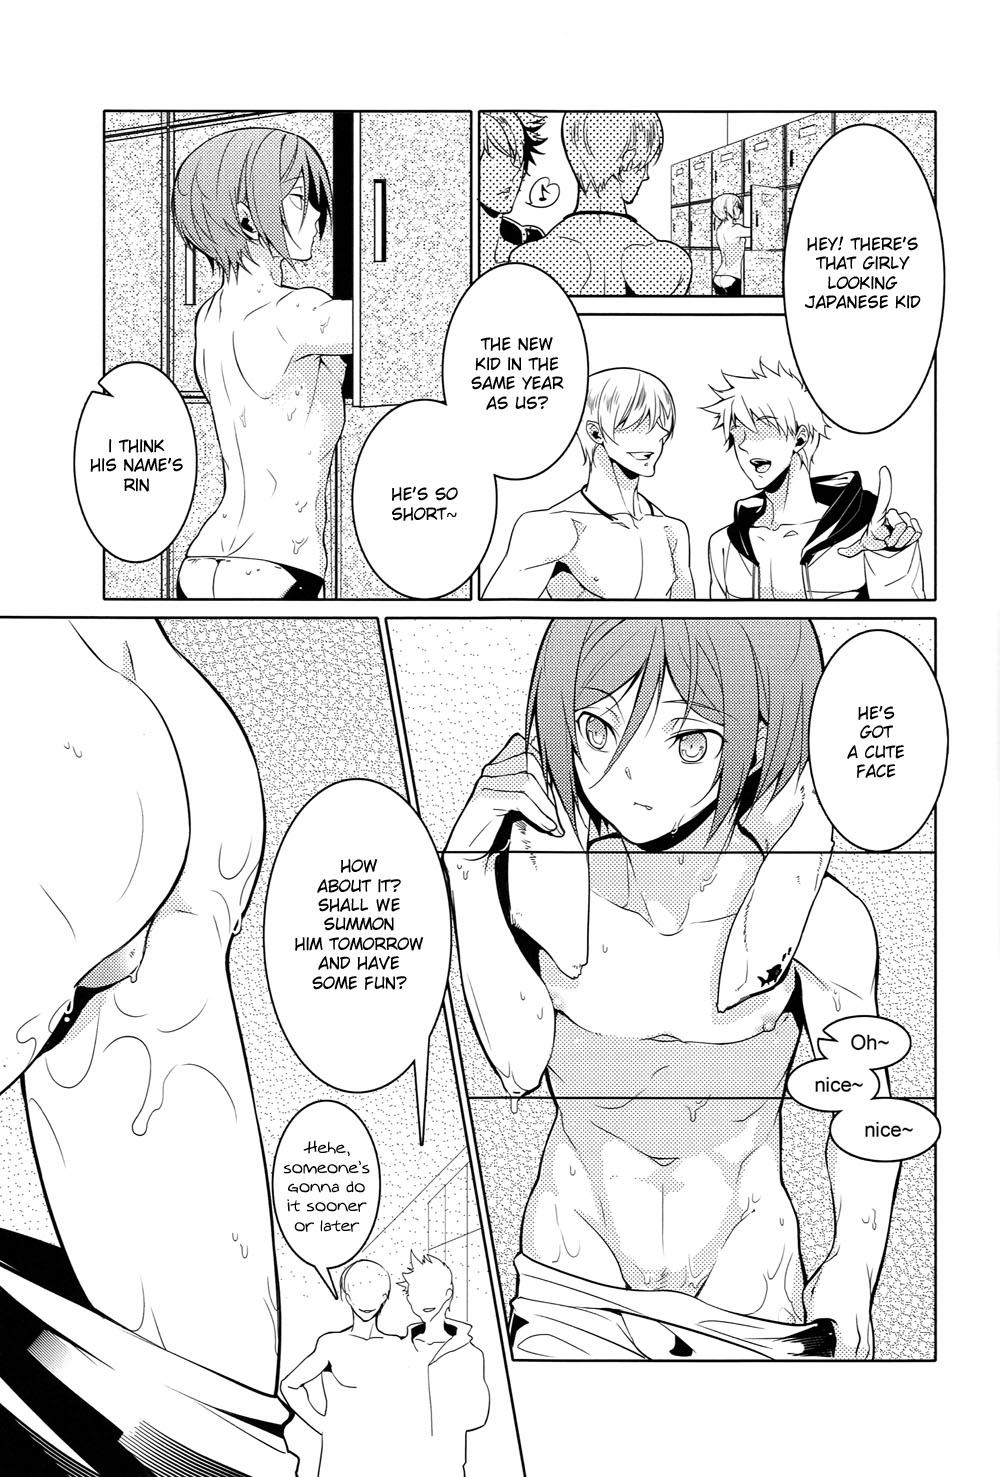 Throat Rin-chan! Ganbare!! - Free Ejaculations - Page 6